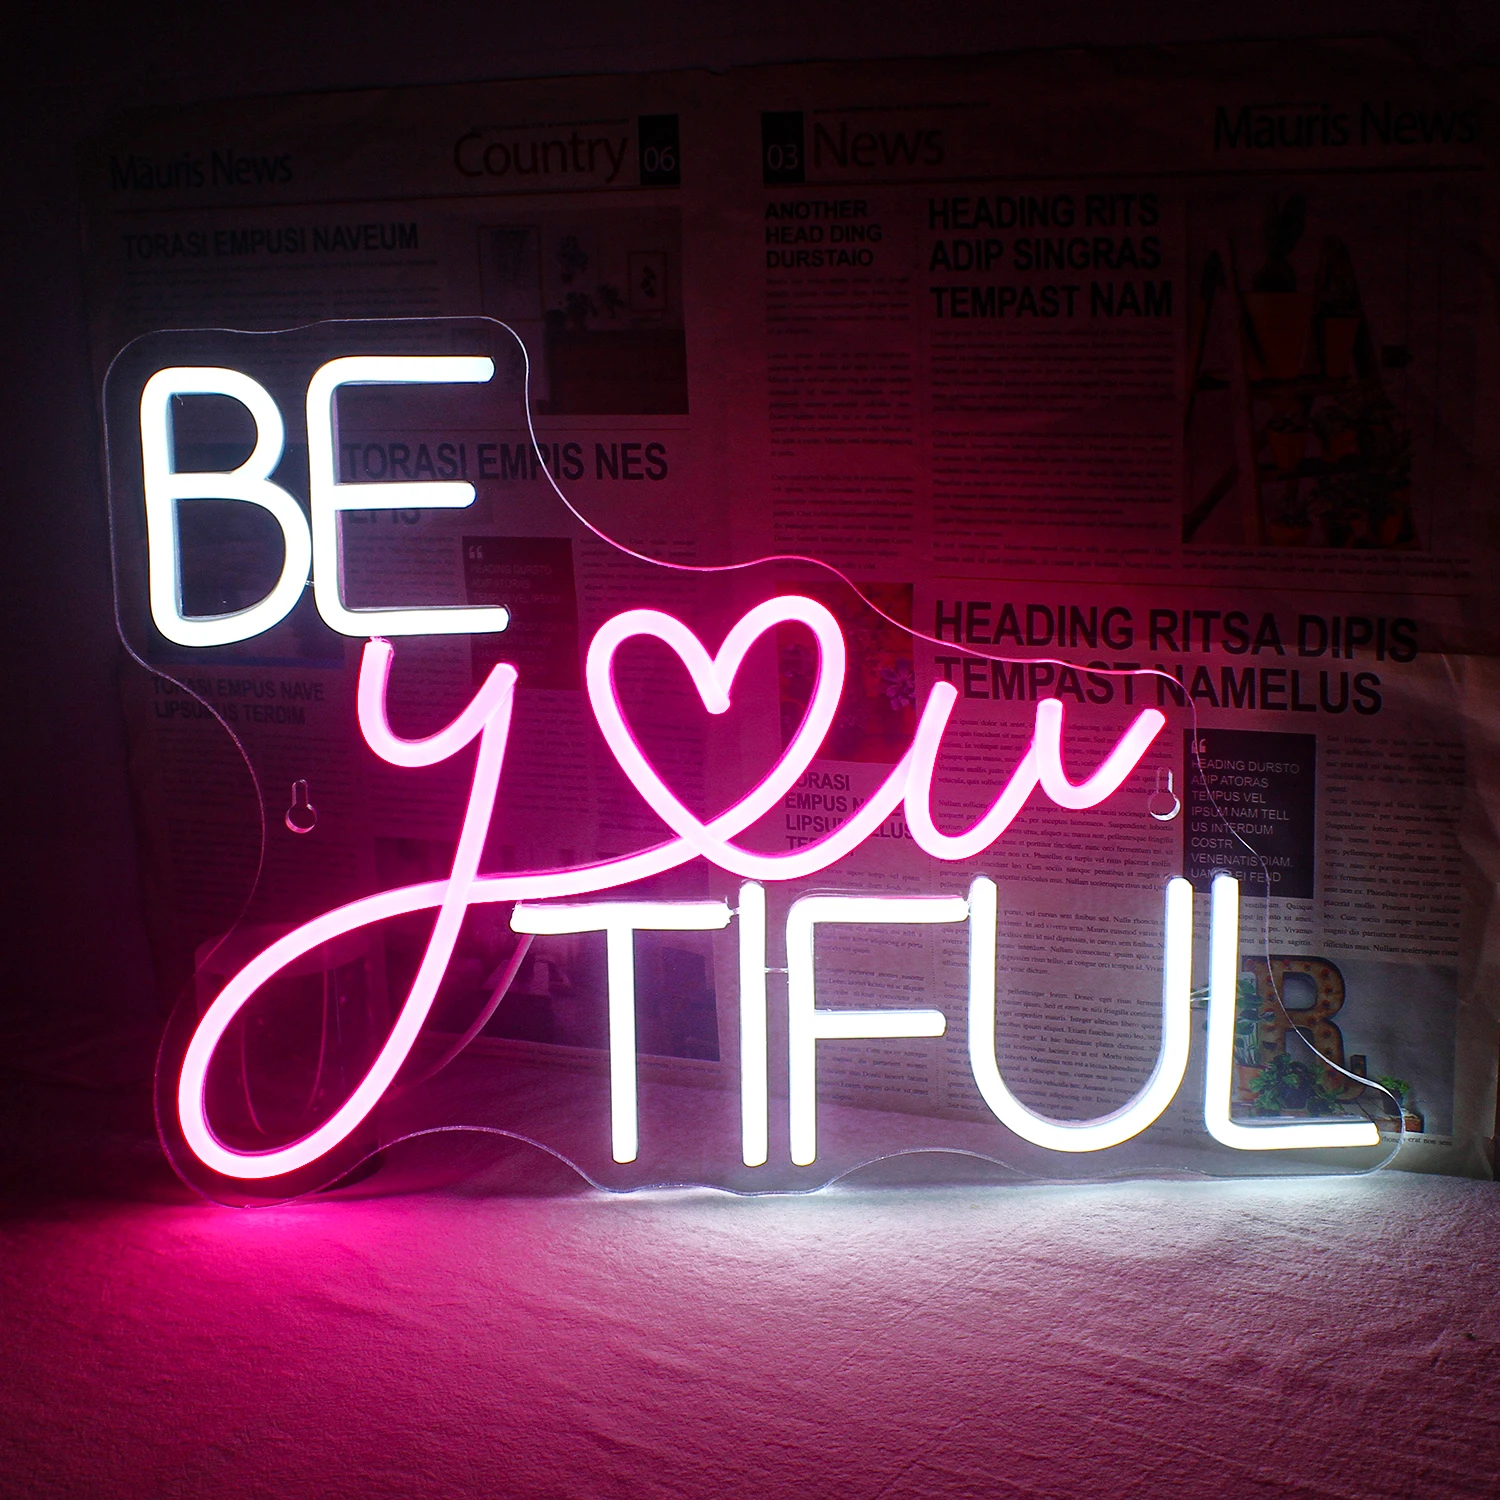 Beautiful Neon Sign LED Light Home Bar Shop Party Personalized Hang Bedroom Make up Beauty Room ART Wall Decor Lamp Girl Gift iwp led neon light custom make your space glow personalized neon led signs neon lamp home room bedside decor birthday gift